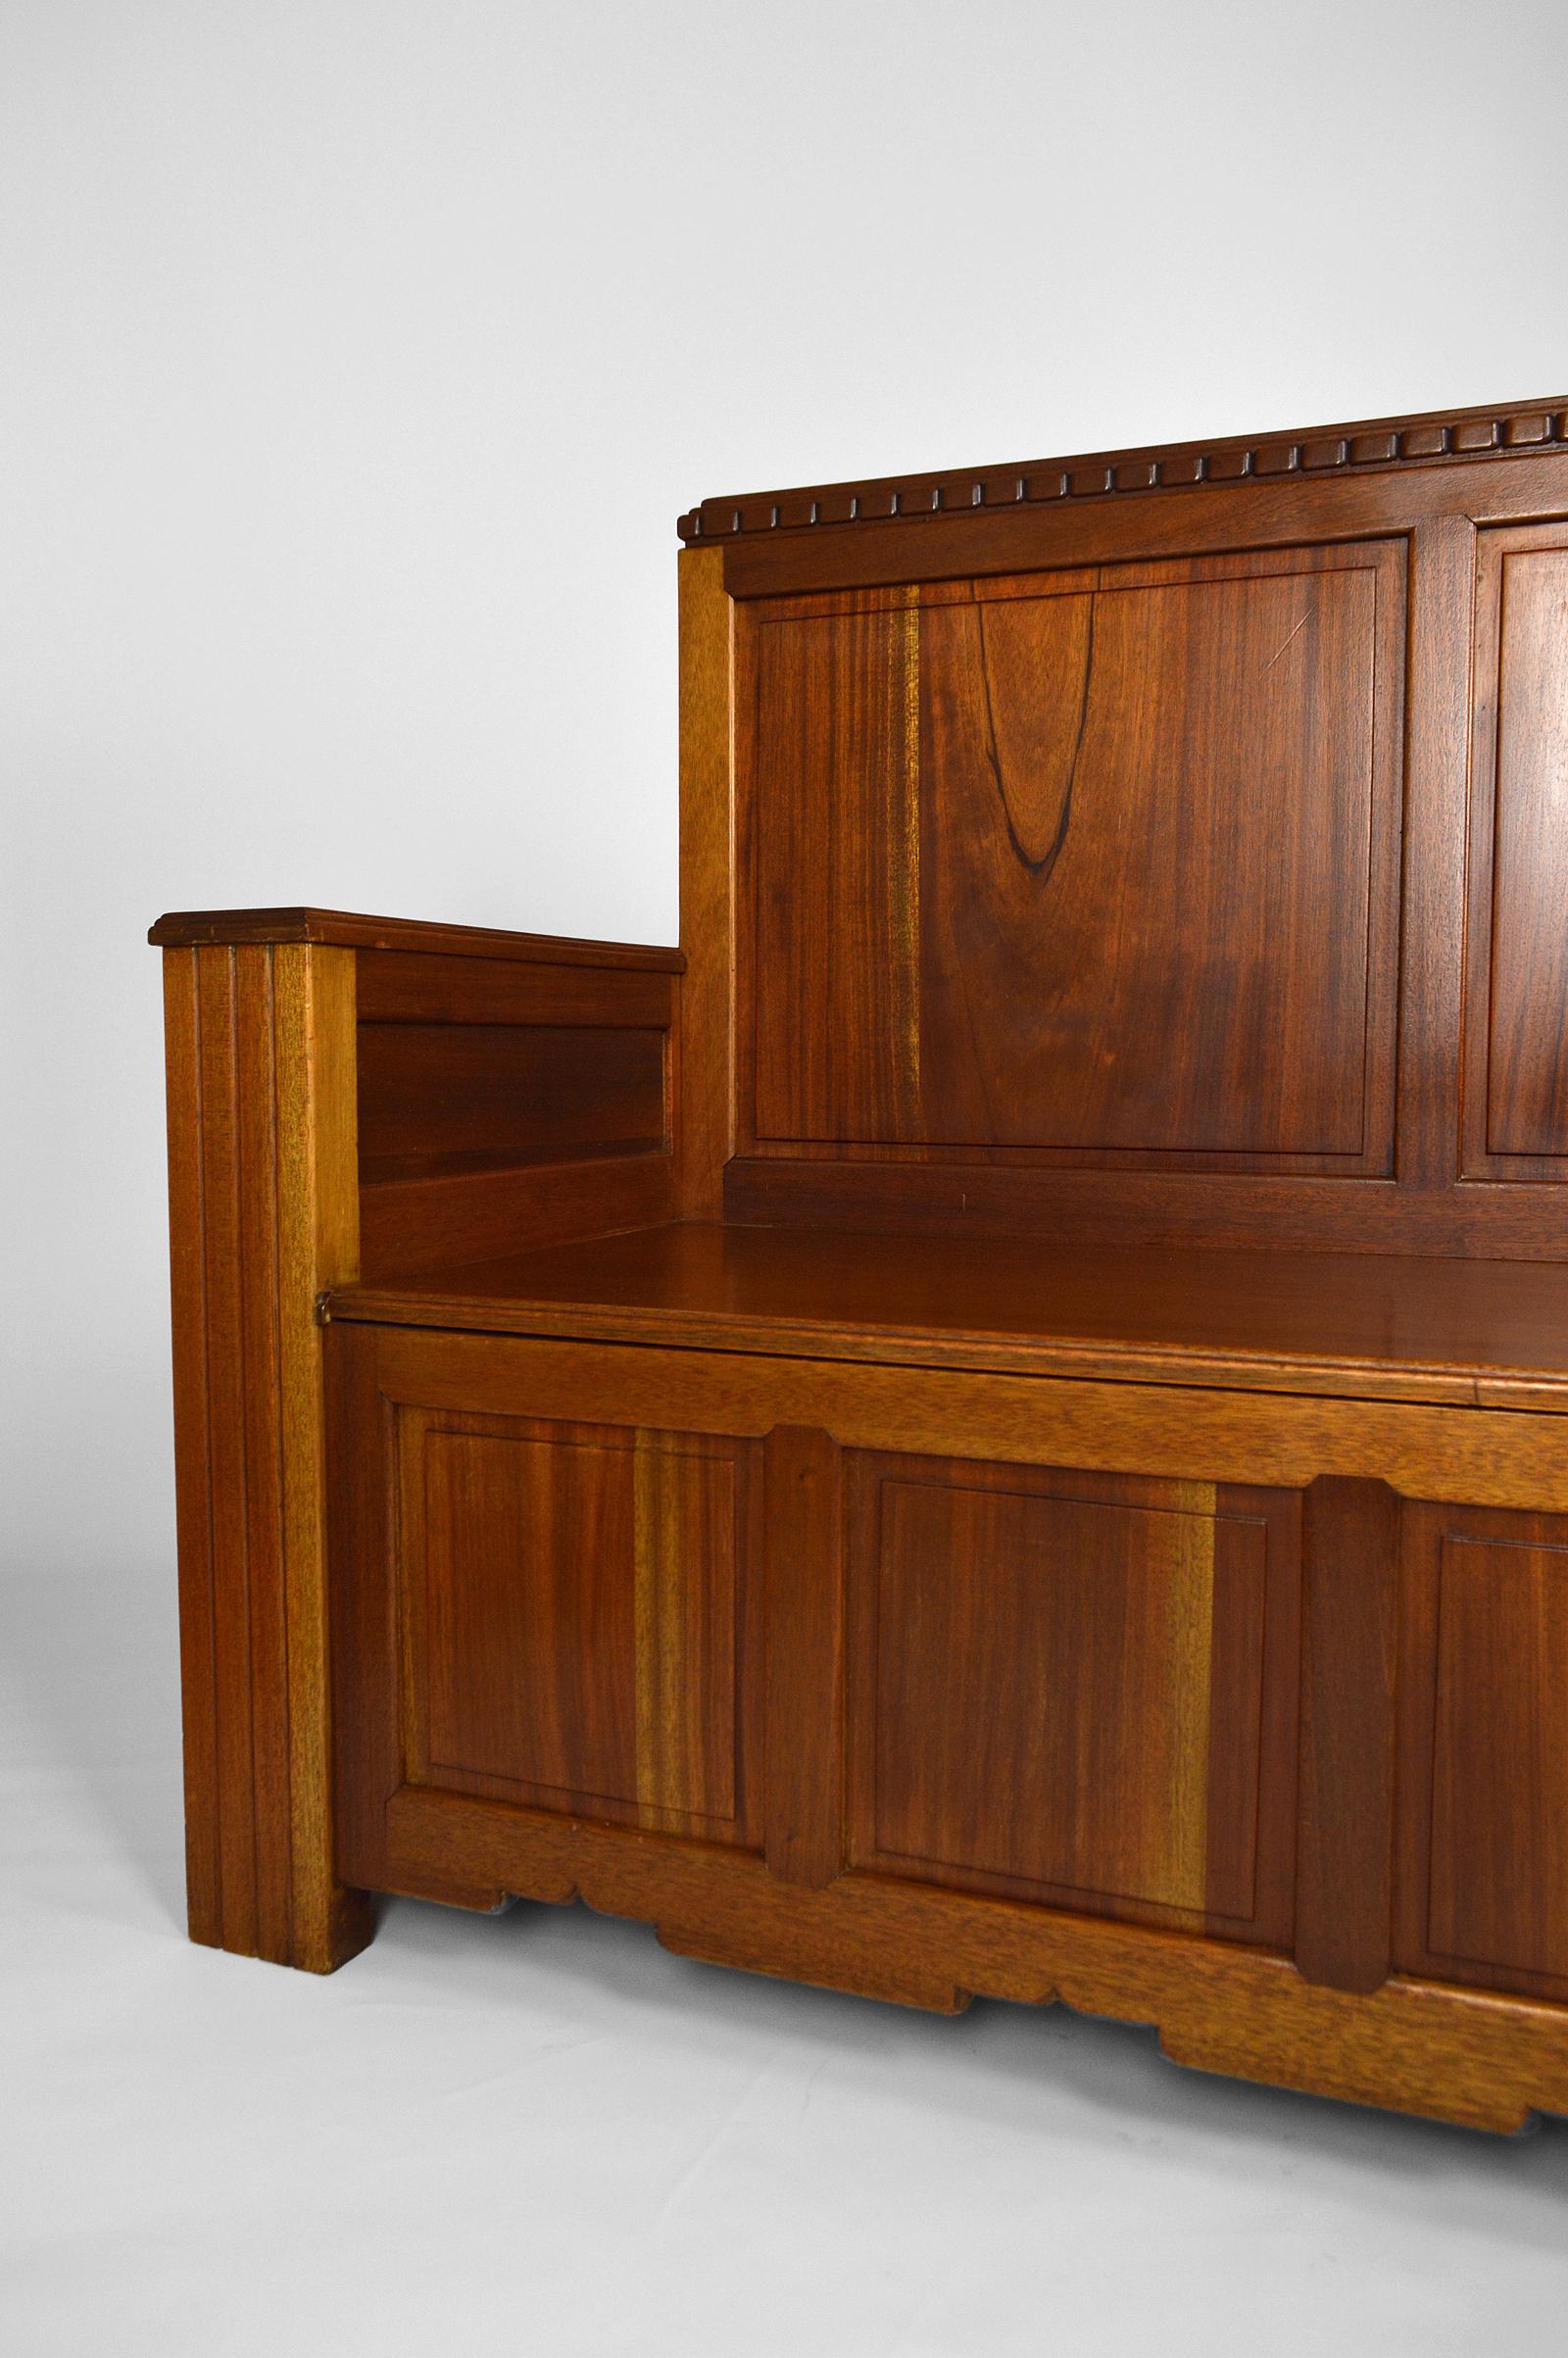 Wood Art Deco Hall Chest Bench by Clement Goyeneche in Mahogany, France, 1930s For Sale